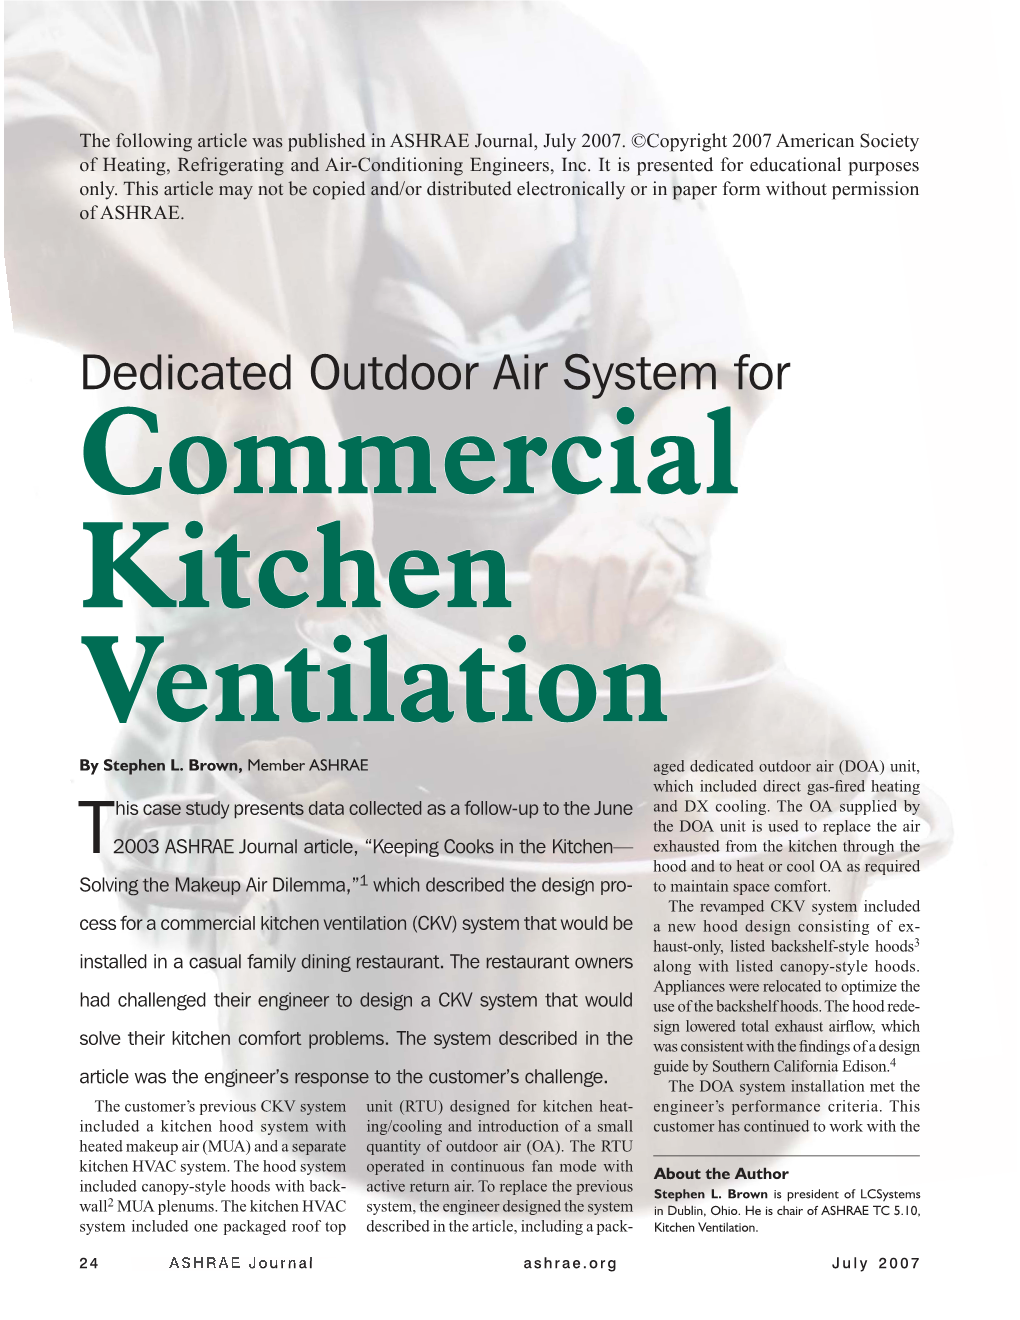 Dedicated Outdoor Air System for Commercial Kitchen Ventilation by Stephen L